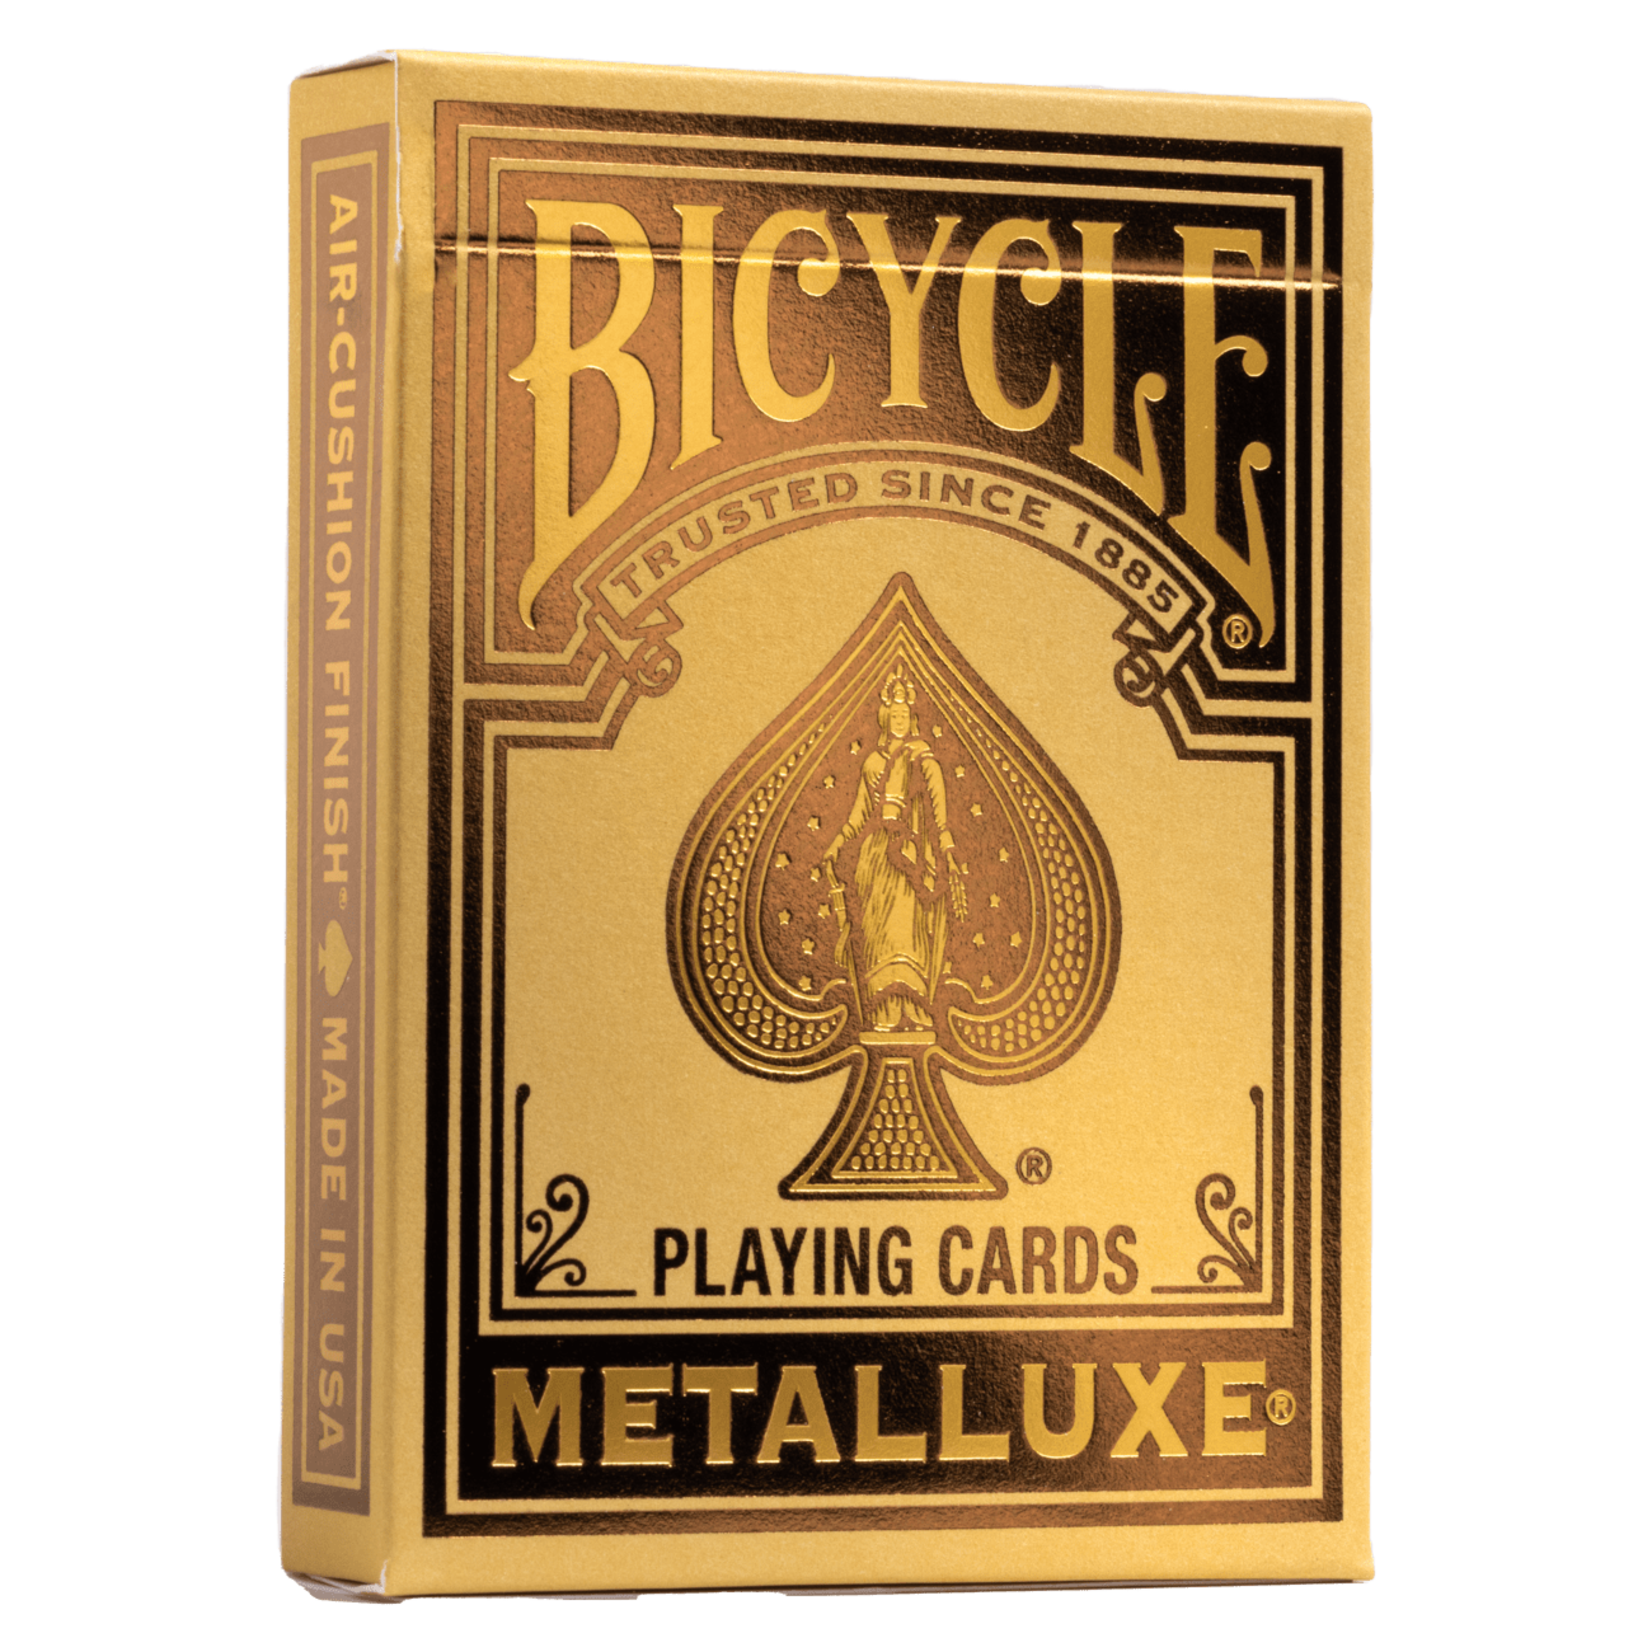 Bicycle Bicycle Metalluxe Gold Playing Cards